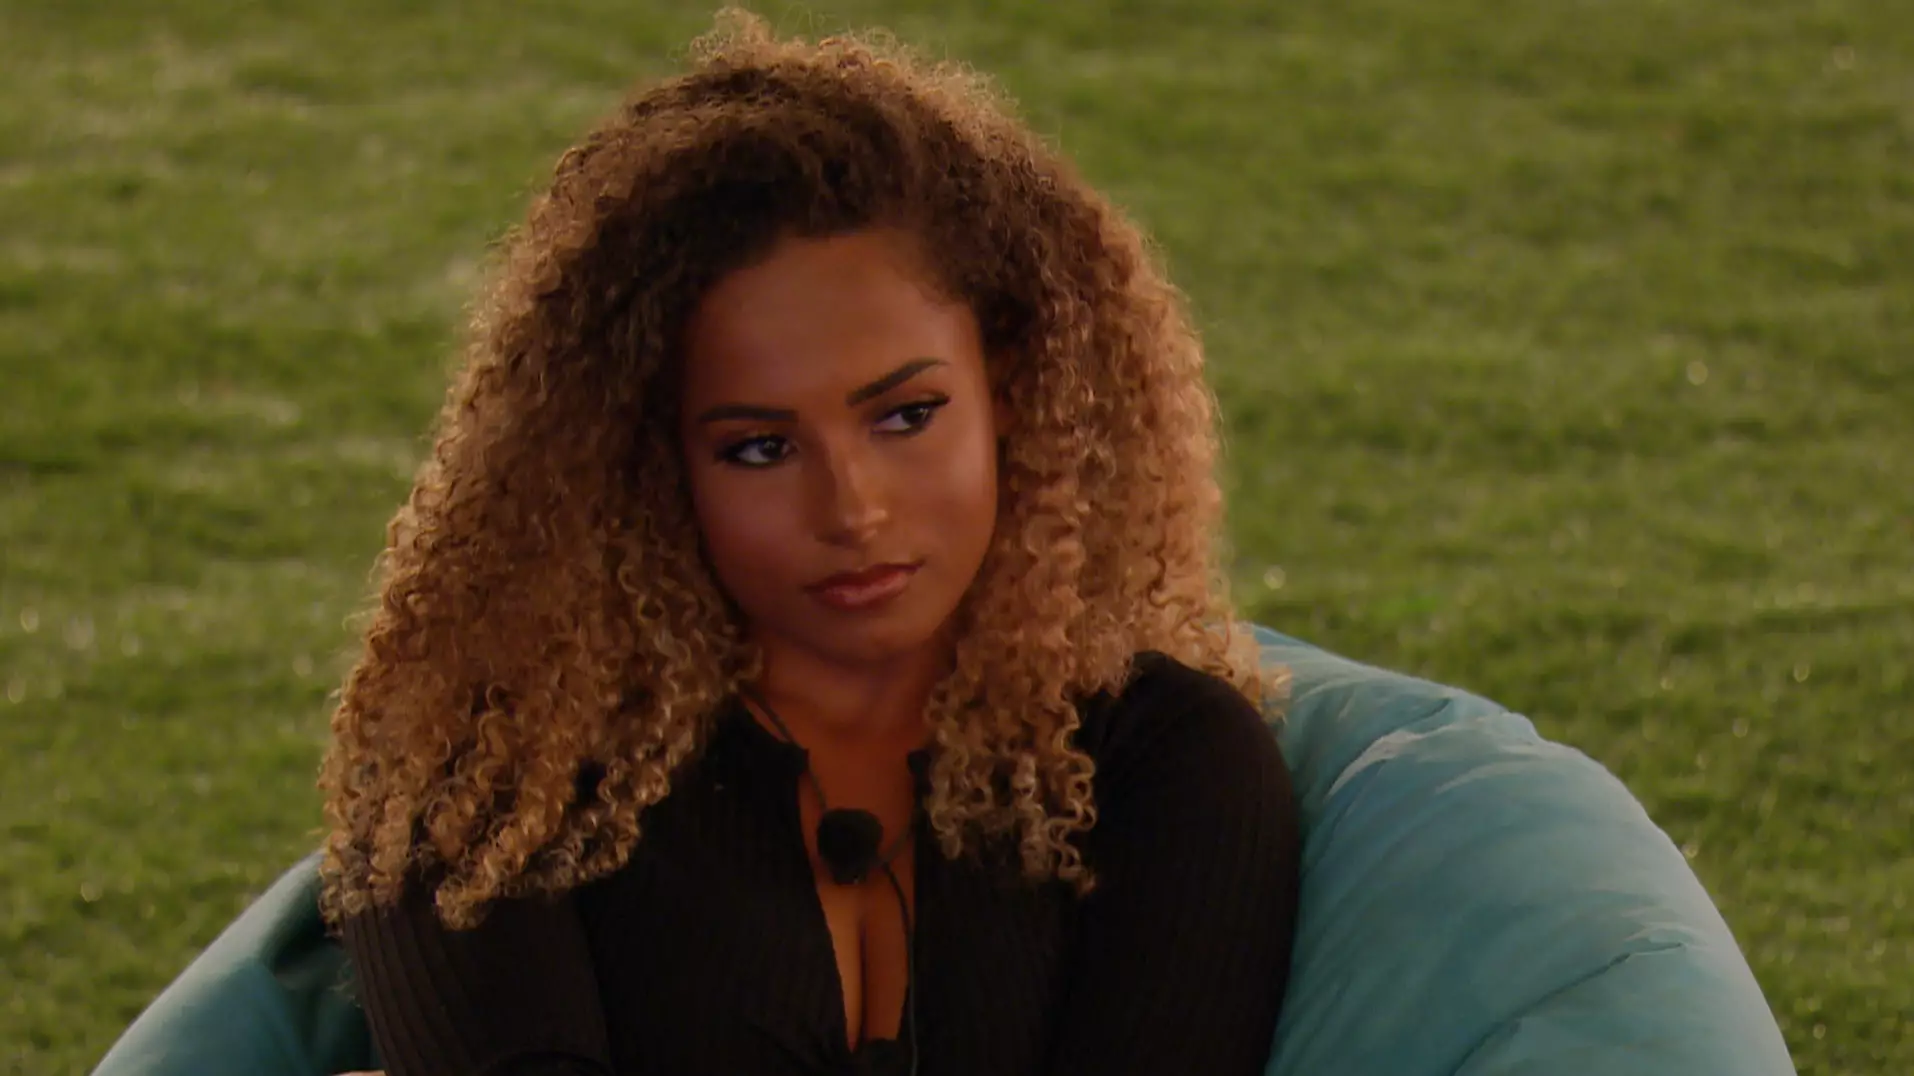 'Love Island' Fans Catch Michael Griffiths Checking Out Amber Gill